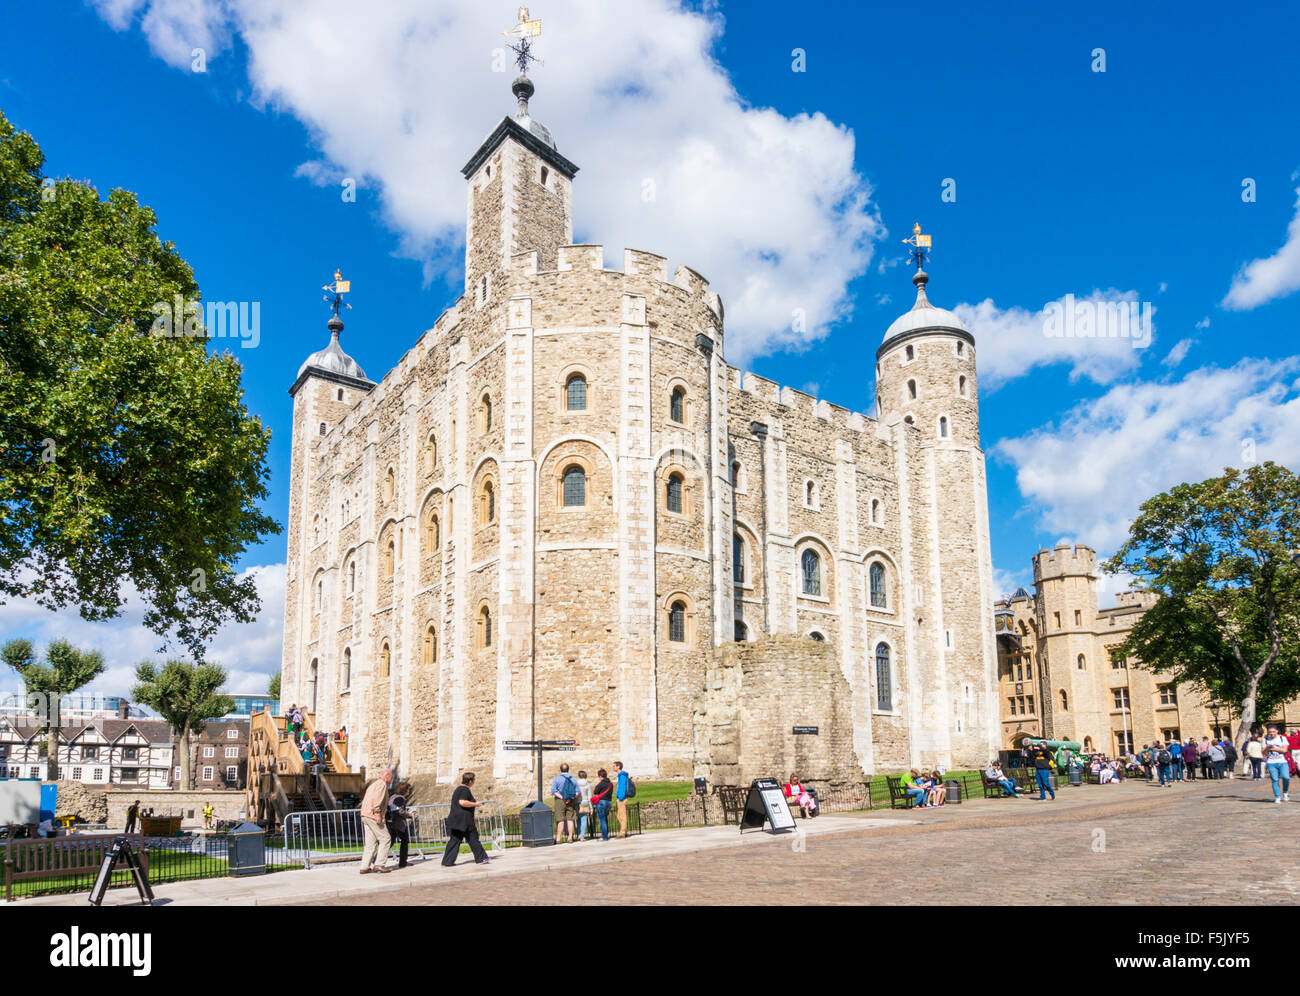 Tourists visiting The white tower inside Tower of London complex City of London England GB UK EU Europe Stock Photo